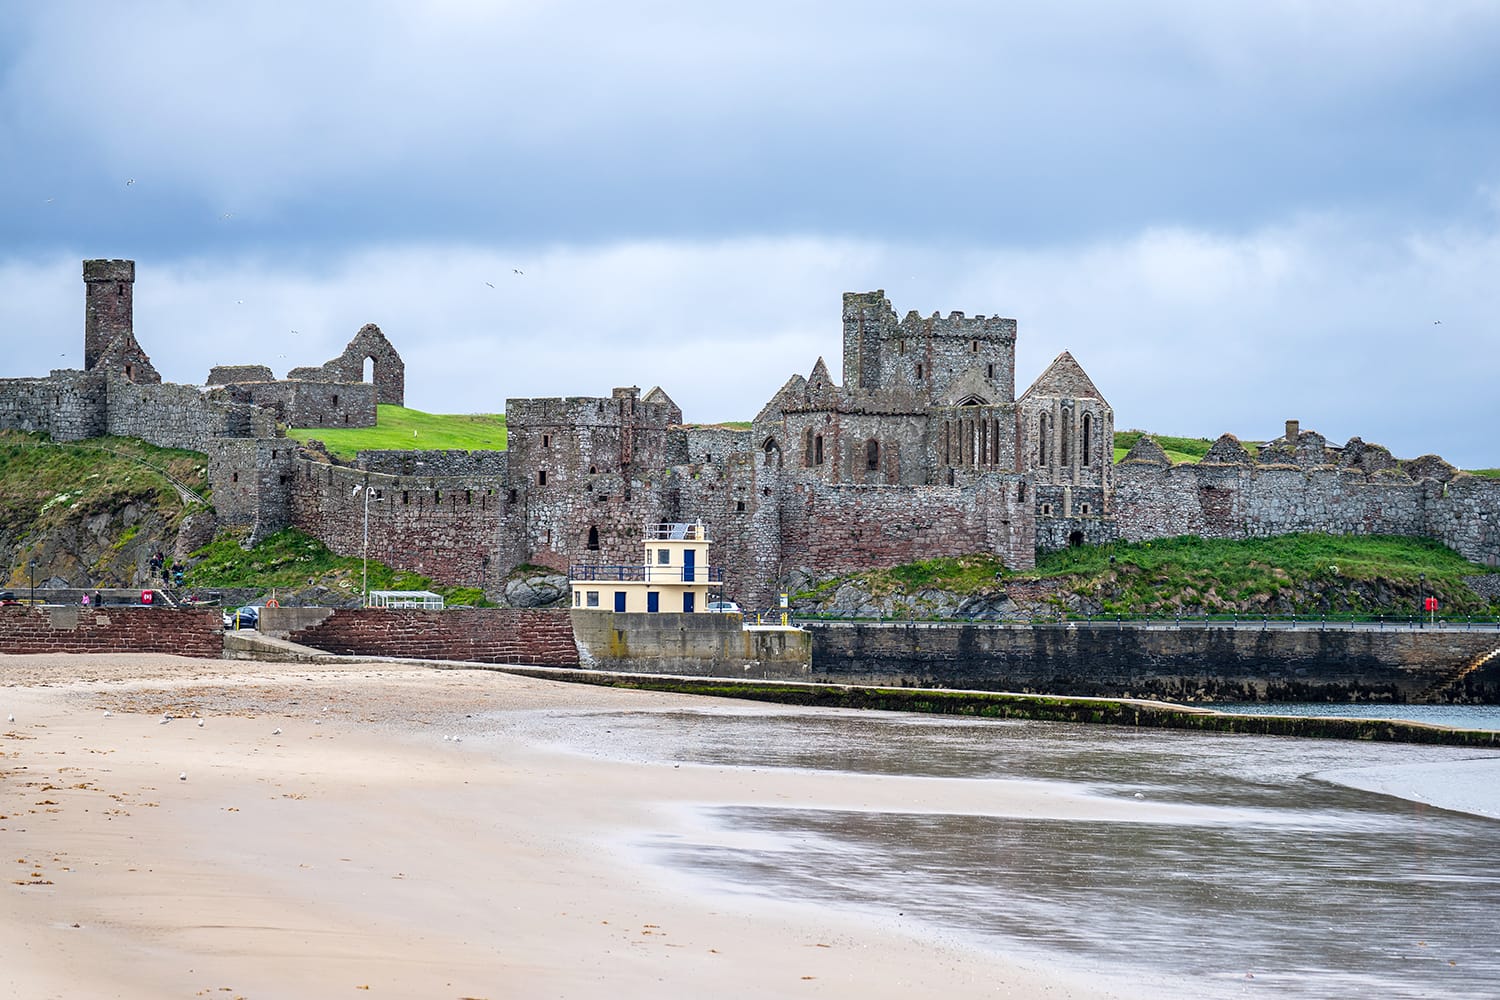 Peel Castle is on St Patrick's Isle, a small island connected to Peel Hill by a causeway.